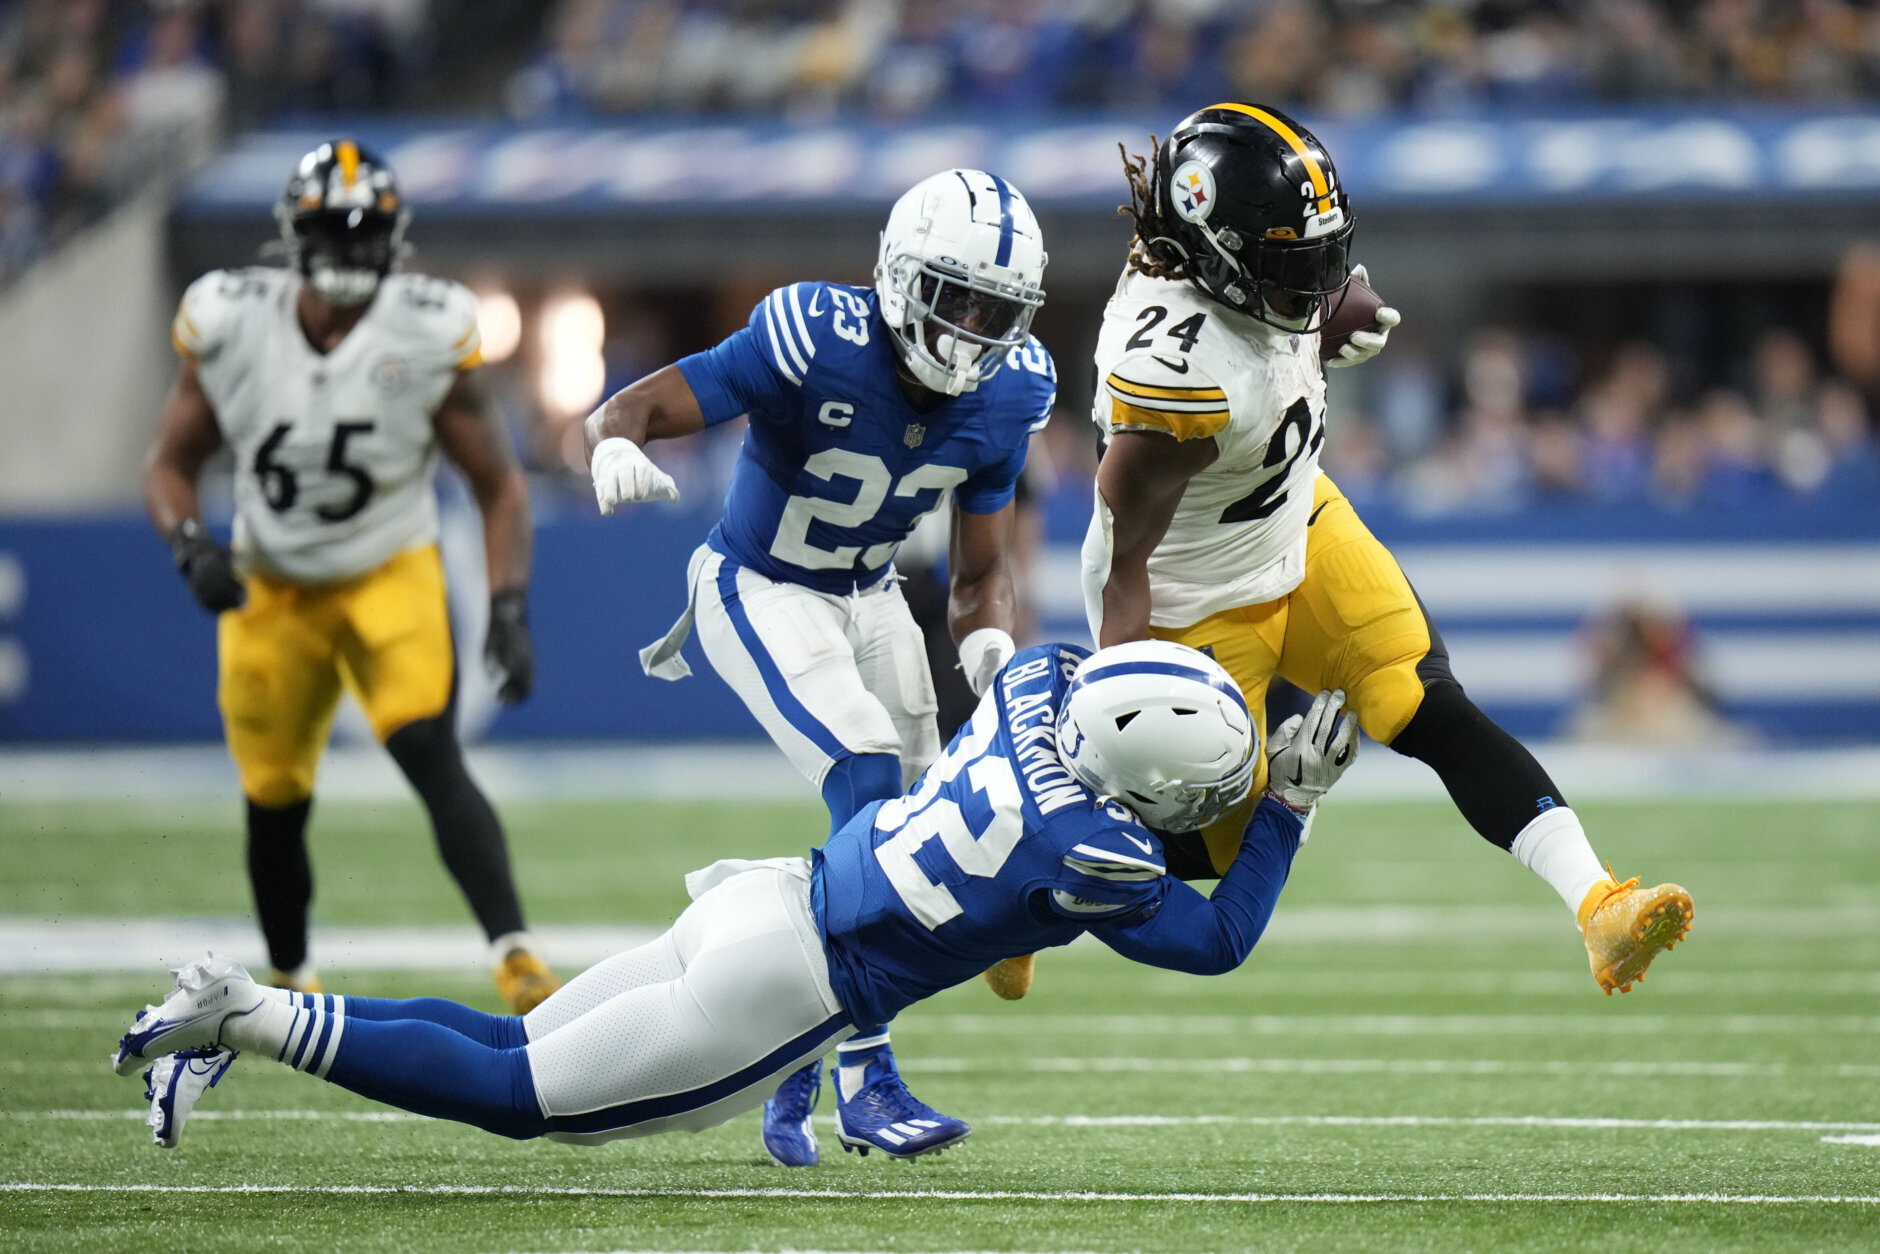 <p><b><i>Steelers 24</i></b><br />
<b><i>Colts 17</i></b></p>
<p>I know it comes in a bad game against an even worse (and <a href="https://twitter.com/ESPNStatsInfo/status/1597416397109428228?s=20&amp;t=iSaG28jwKo_UVNMKFBquRQ">embarrassingly inept</a>) offense but Mike Tomlin&#8217;s 19-3 record on Monday Night Football is incredibly impressive. If he can lead what is by far his worst Steelers team to a non-losing record to keep his streak alive, name the Coach of the Year award after Tomlin.</p>
